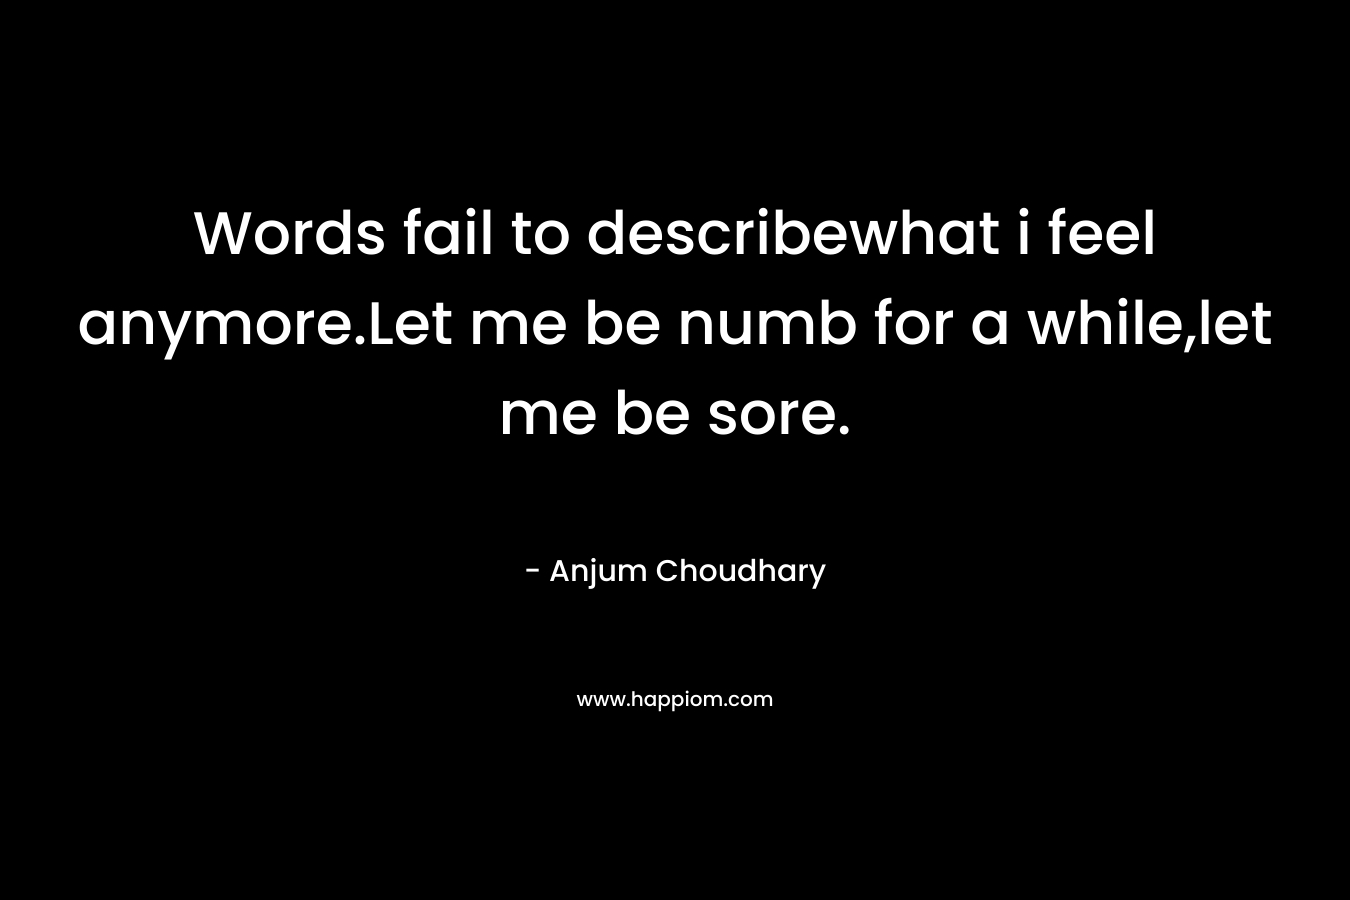 Words fail to describewhat i feel anymore.Let me be numb for a while,let me be sore. – Anjum Choudhary